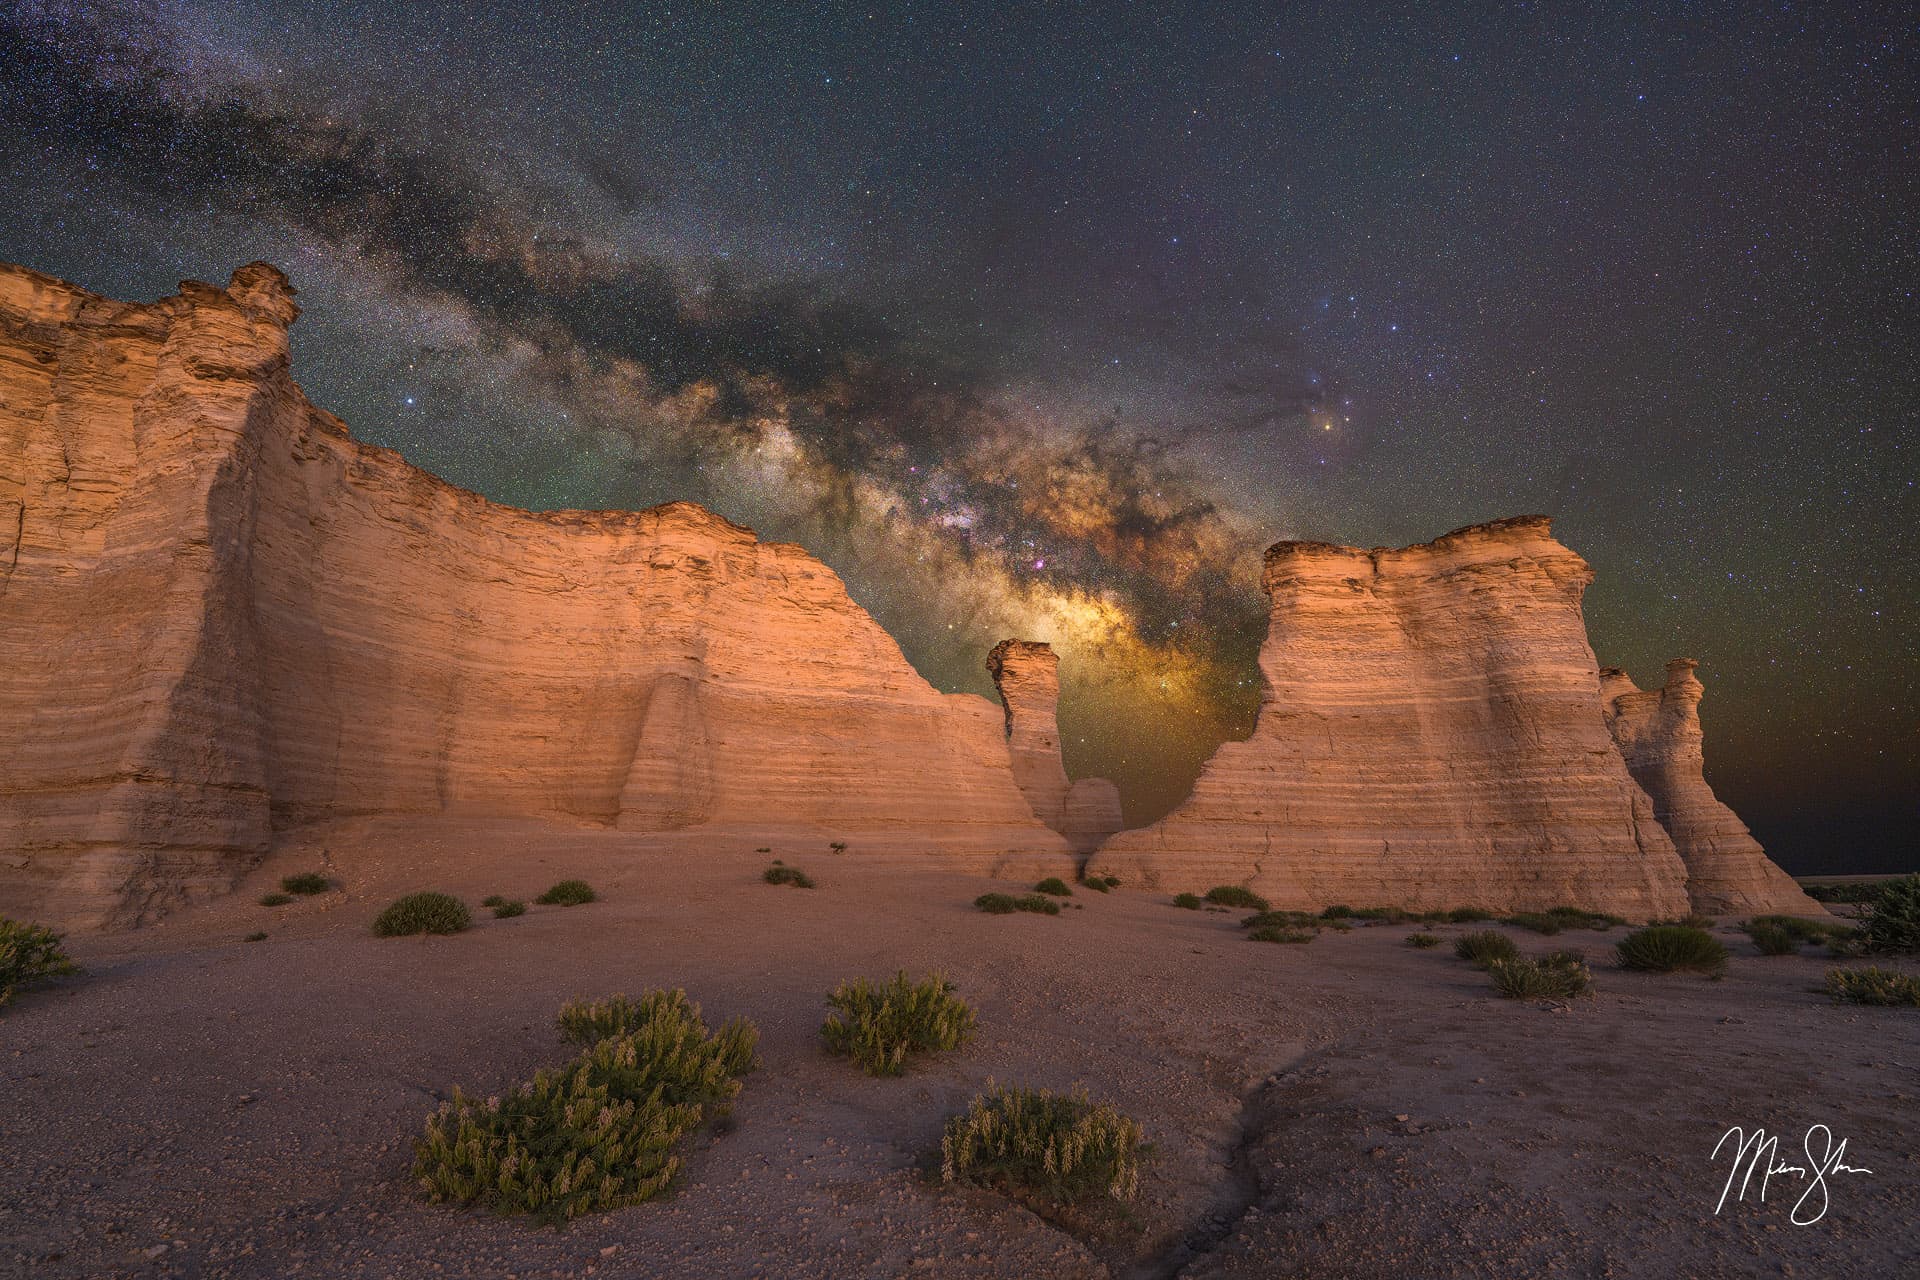 Astrophotography: The Milky Way lights up the night sky